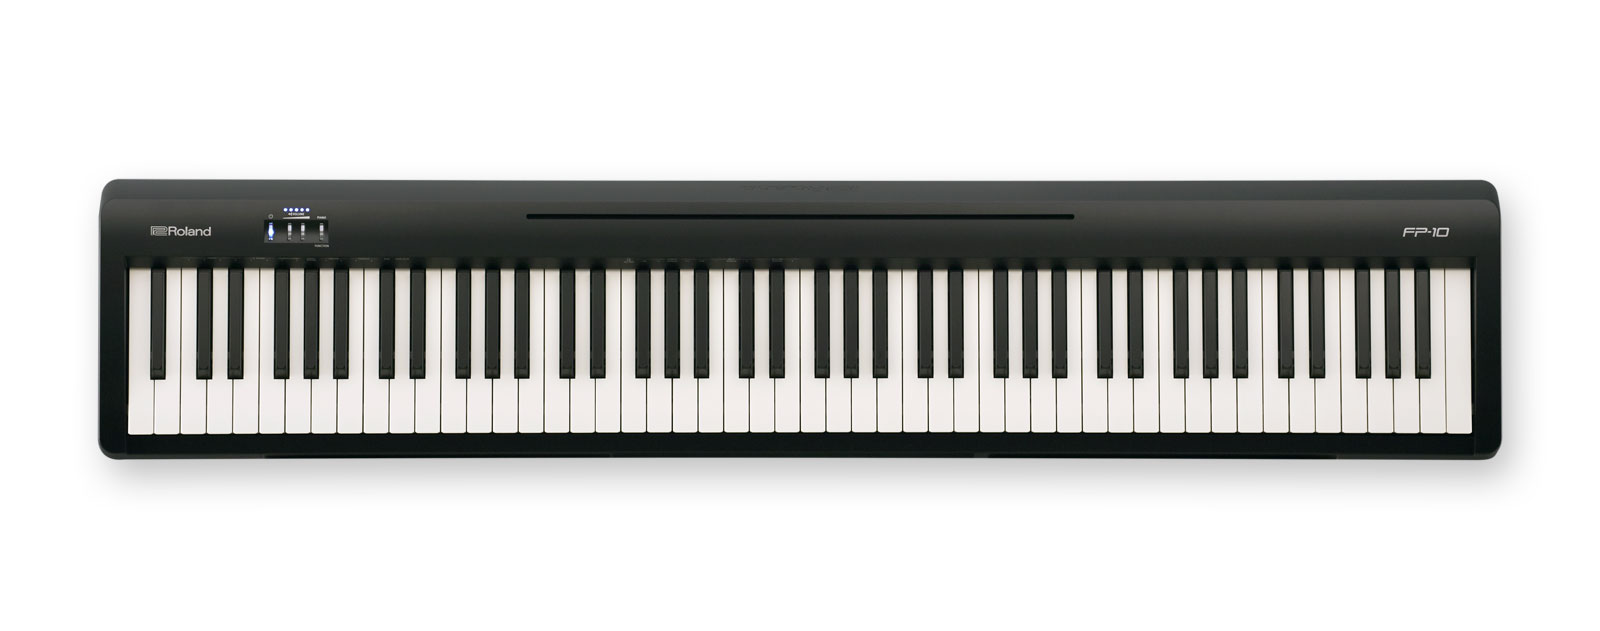 FP-10 Digital/Stage Piano